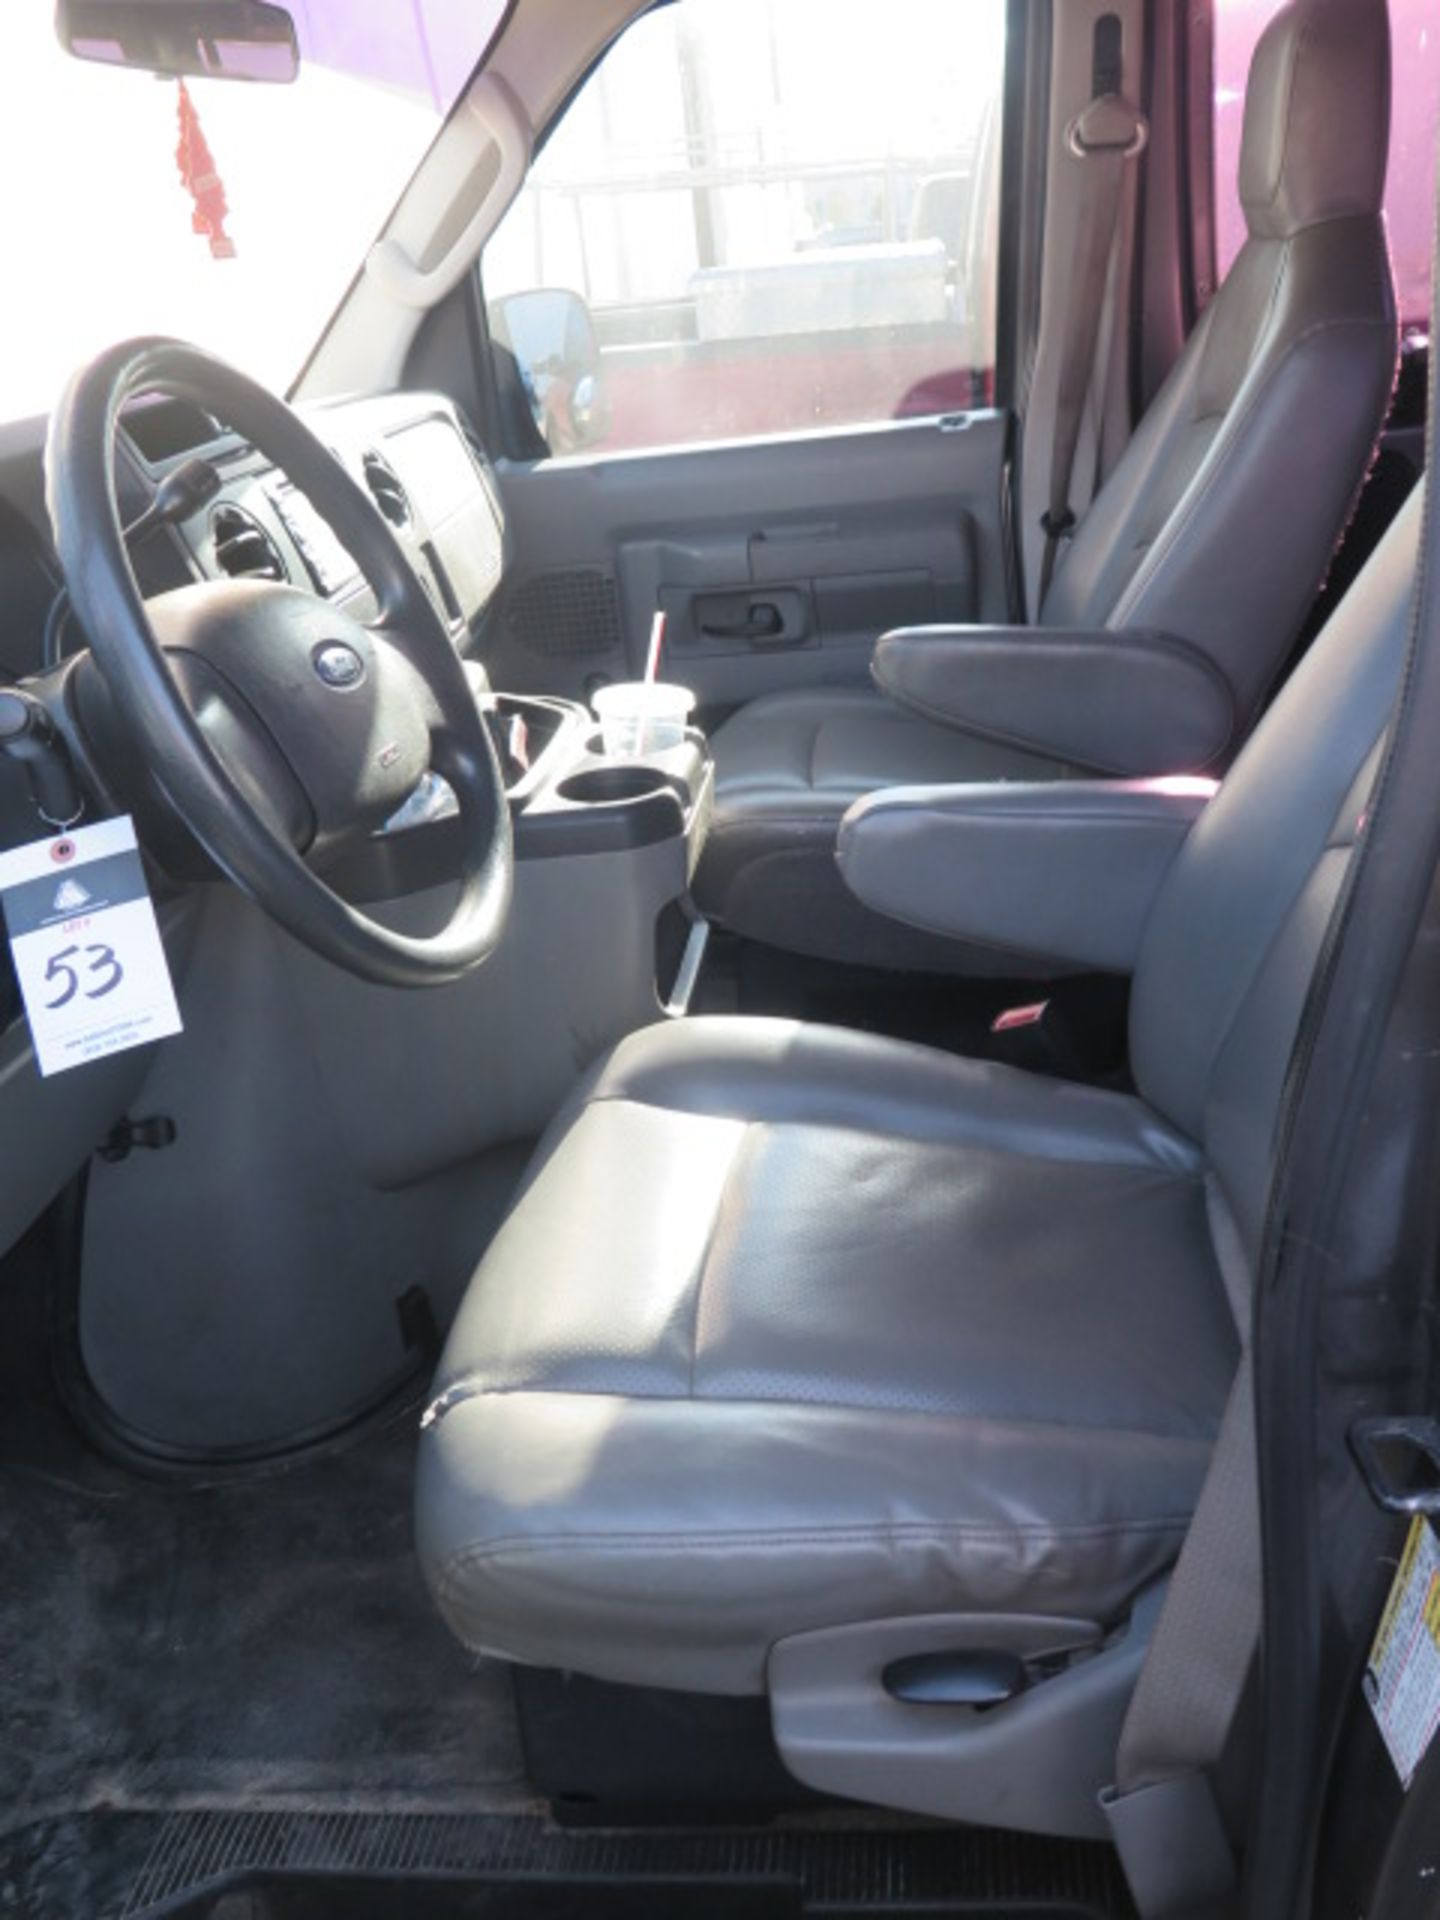 2009 Ford E-Series 11-Passanger Van Lisc# 6GTA651 w/ Gas Engine, Automatic Trans, AC, CD, 110,811 - Image 9 of 15